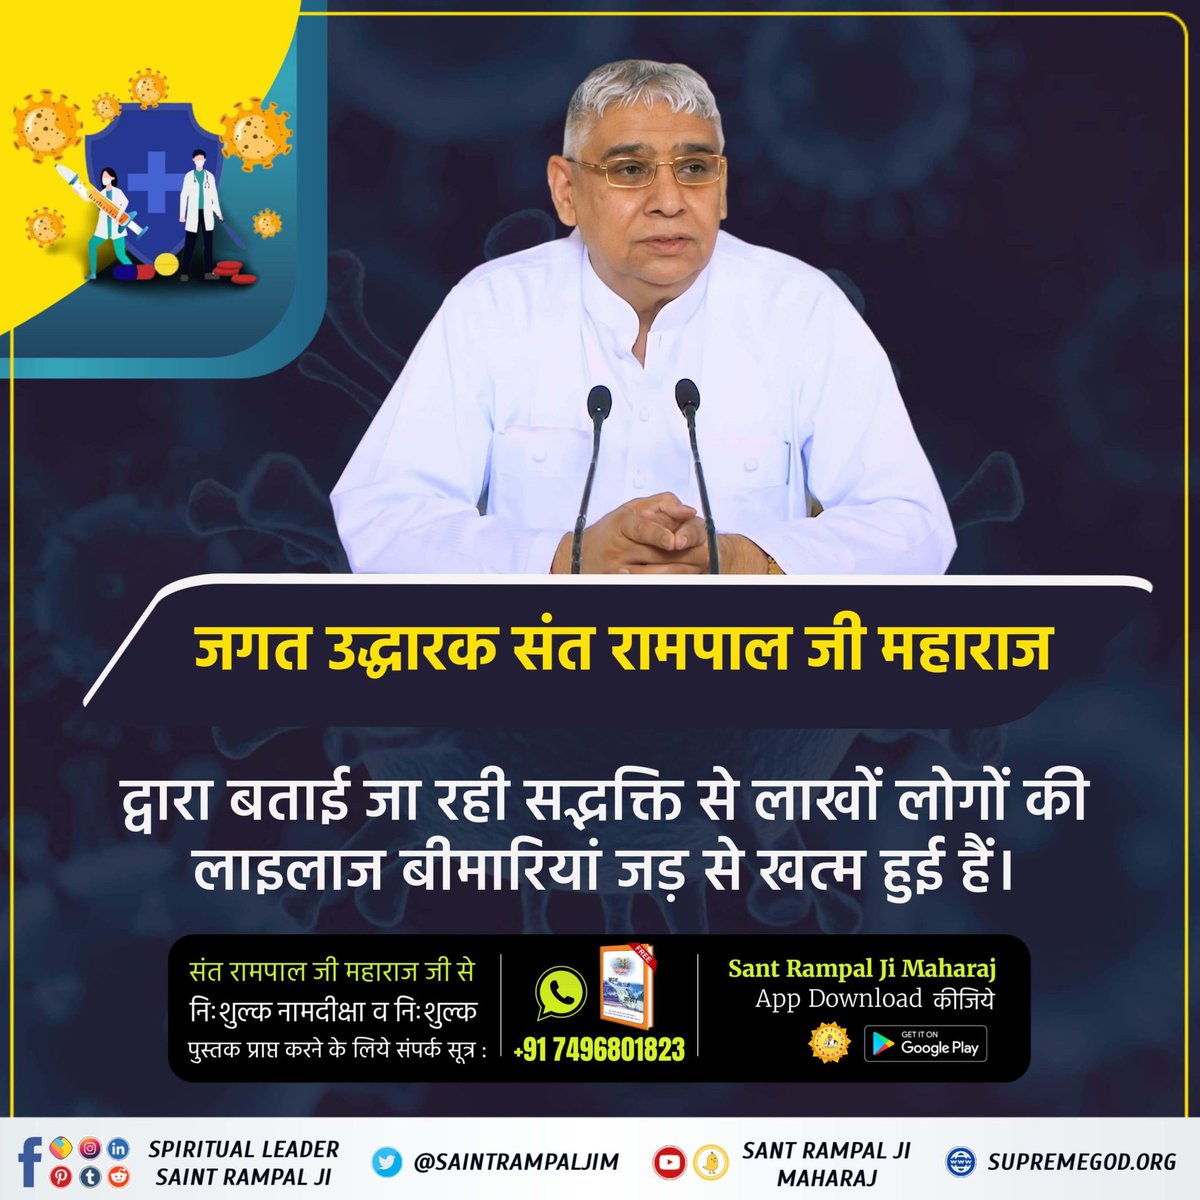 #जगत_उद्धारक_संत_रामपालजी The Messiah has come The Saviour Sant Rampal Ji Maharaj is eradicating all evils and social ills such as addiction, dowry, female infanticide, theft, corruption, etc., from the root through true spiritual knowledge. Saviour Of The World